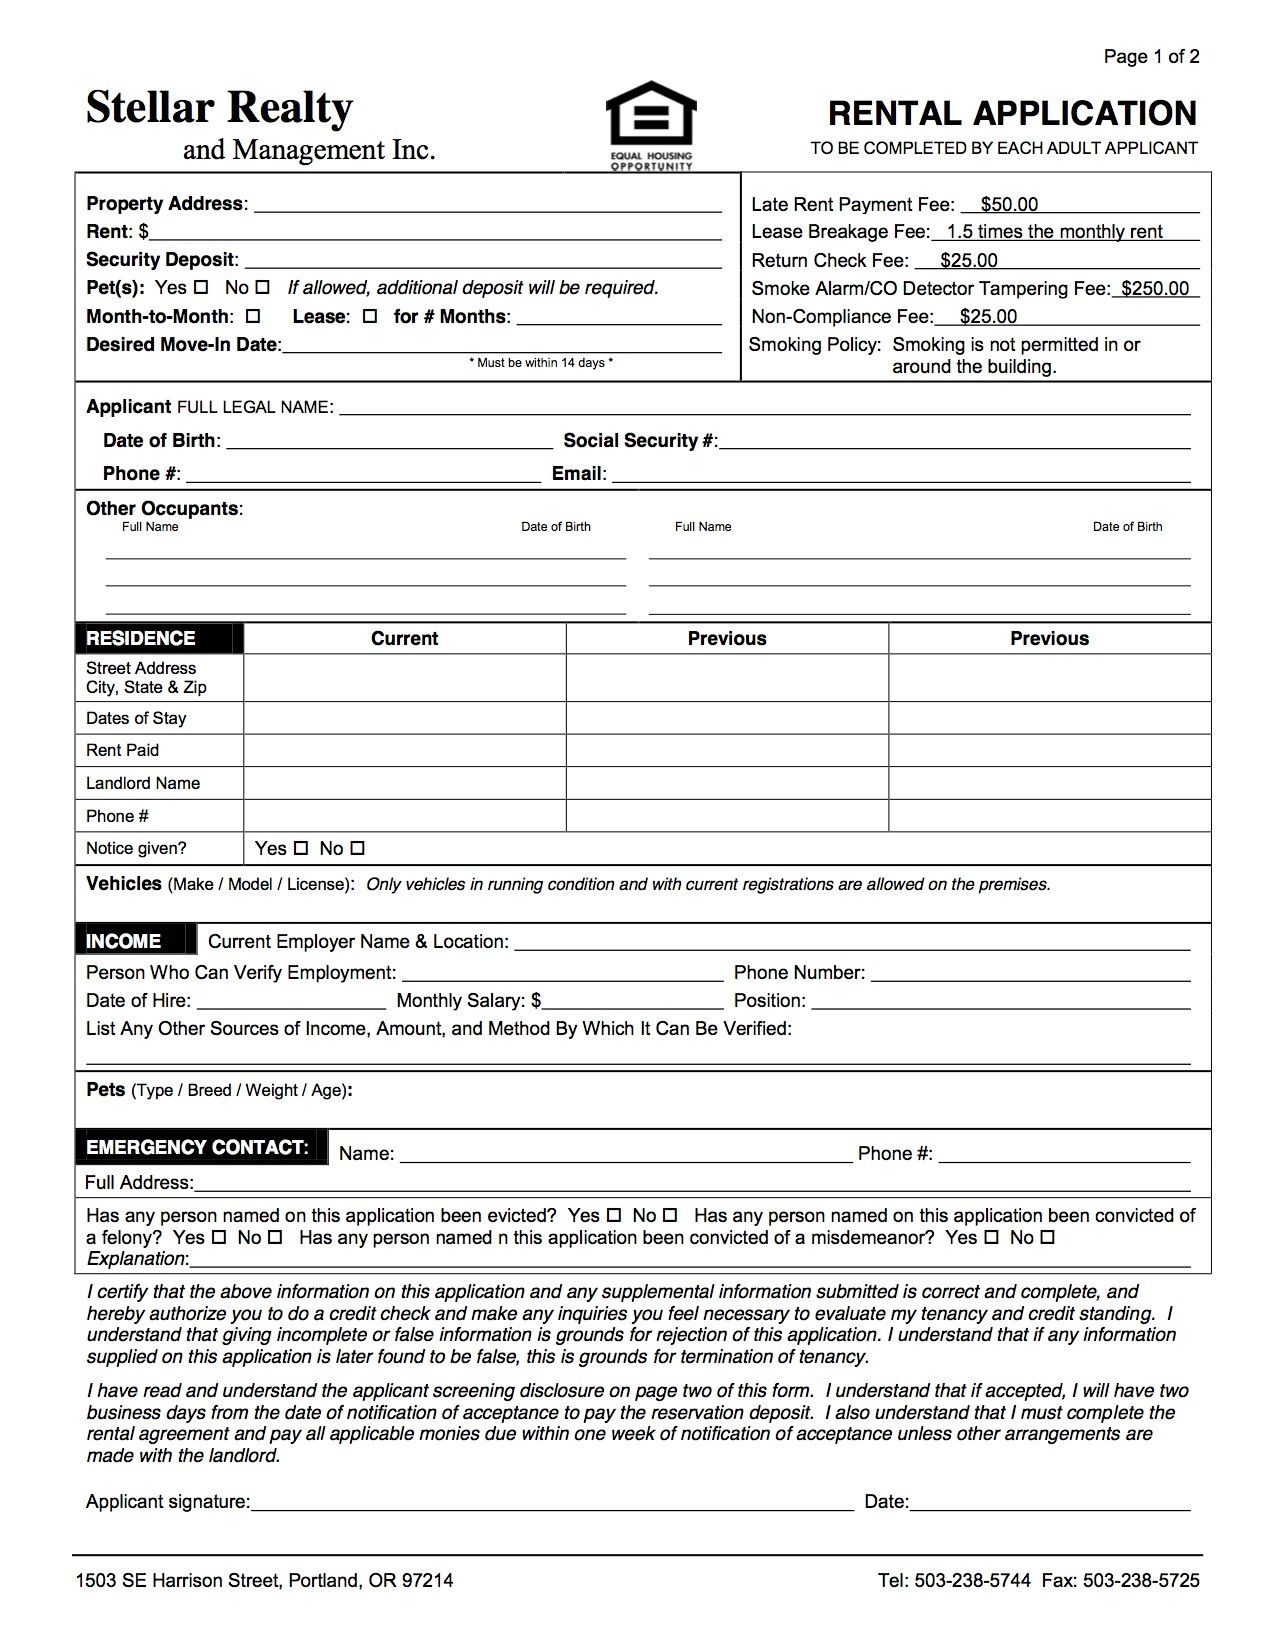 Application | Stellar Realty And Management Inc | 503.238.5744 - Free Printable House Rental Application Form